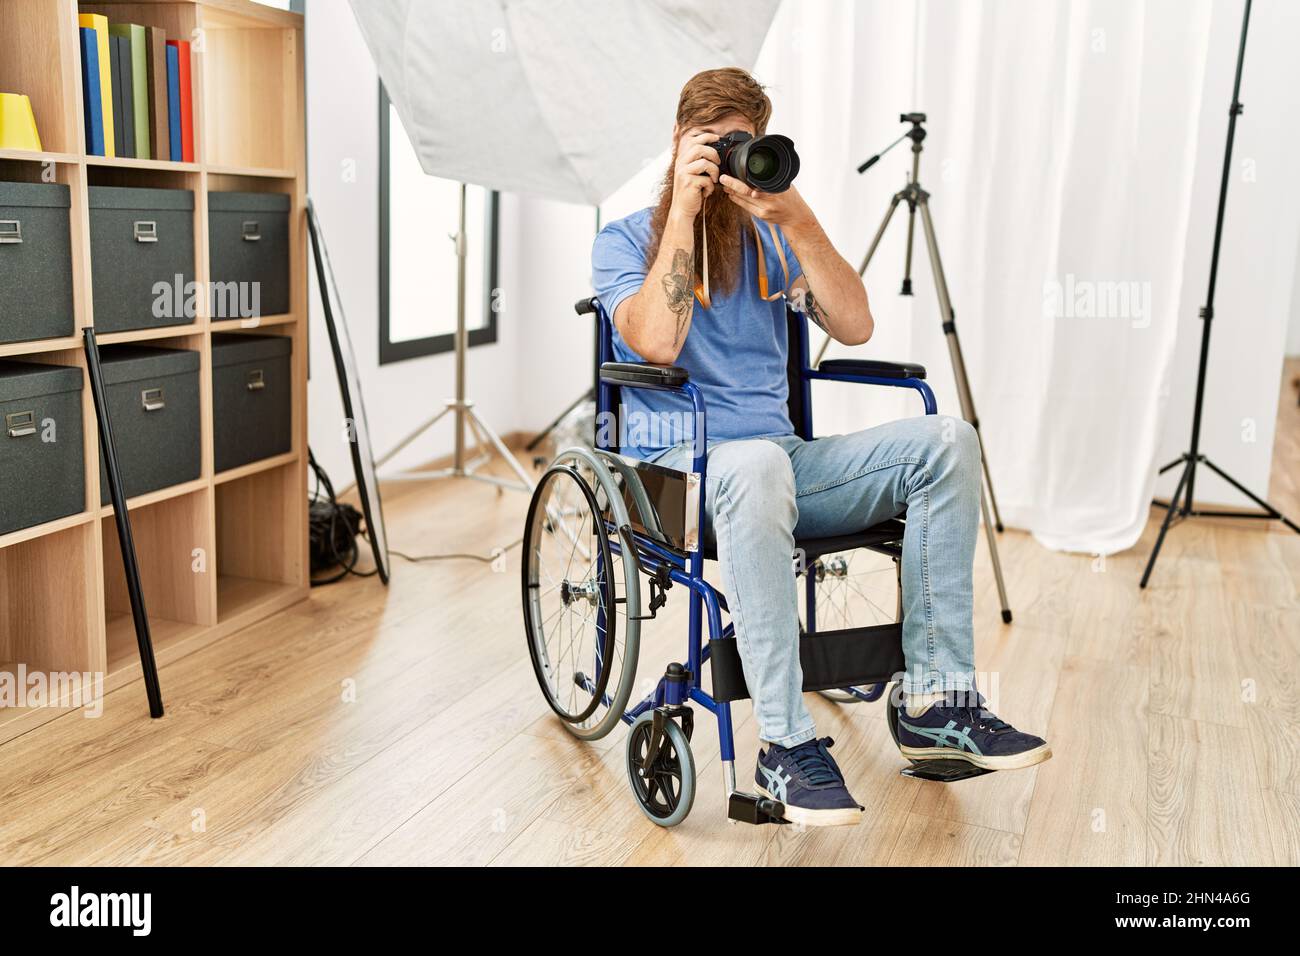 Young redhead man photographer sitting on wheelchair using professional camera at clinic Stock Photo